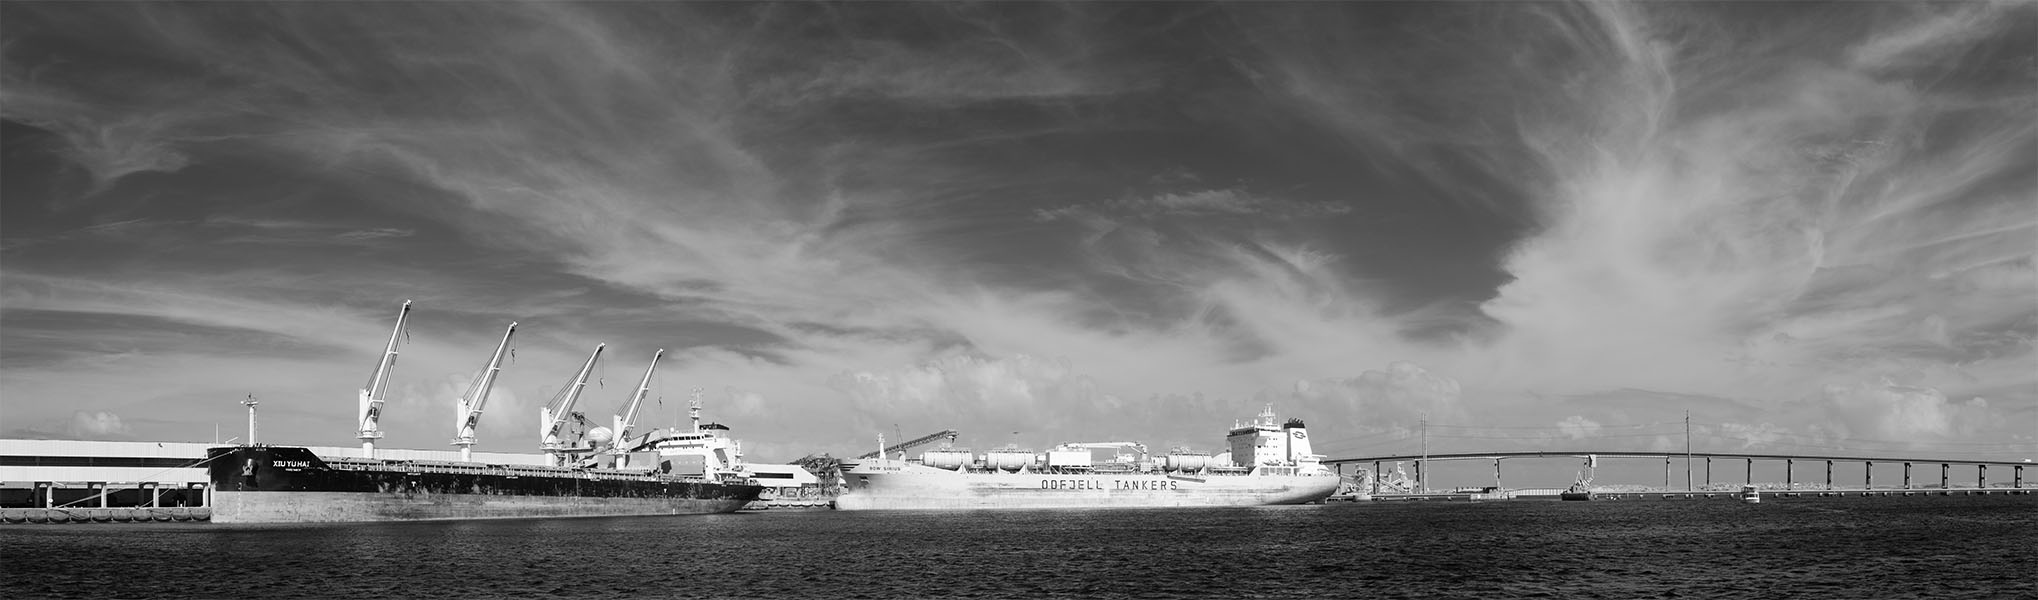 Infrared Panorama of Bulk Carrying Ships at Wharf with Dramatic Sky